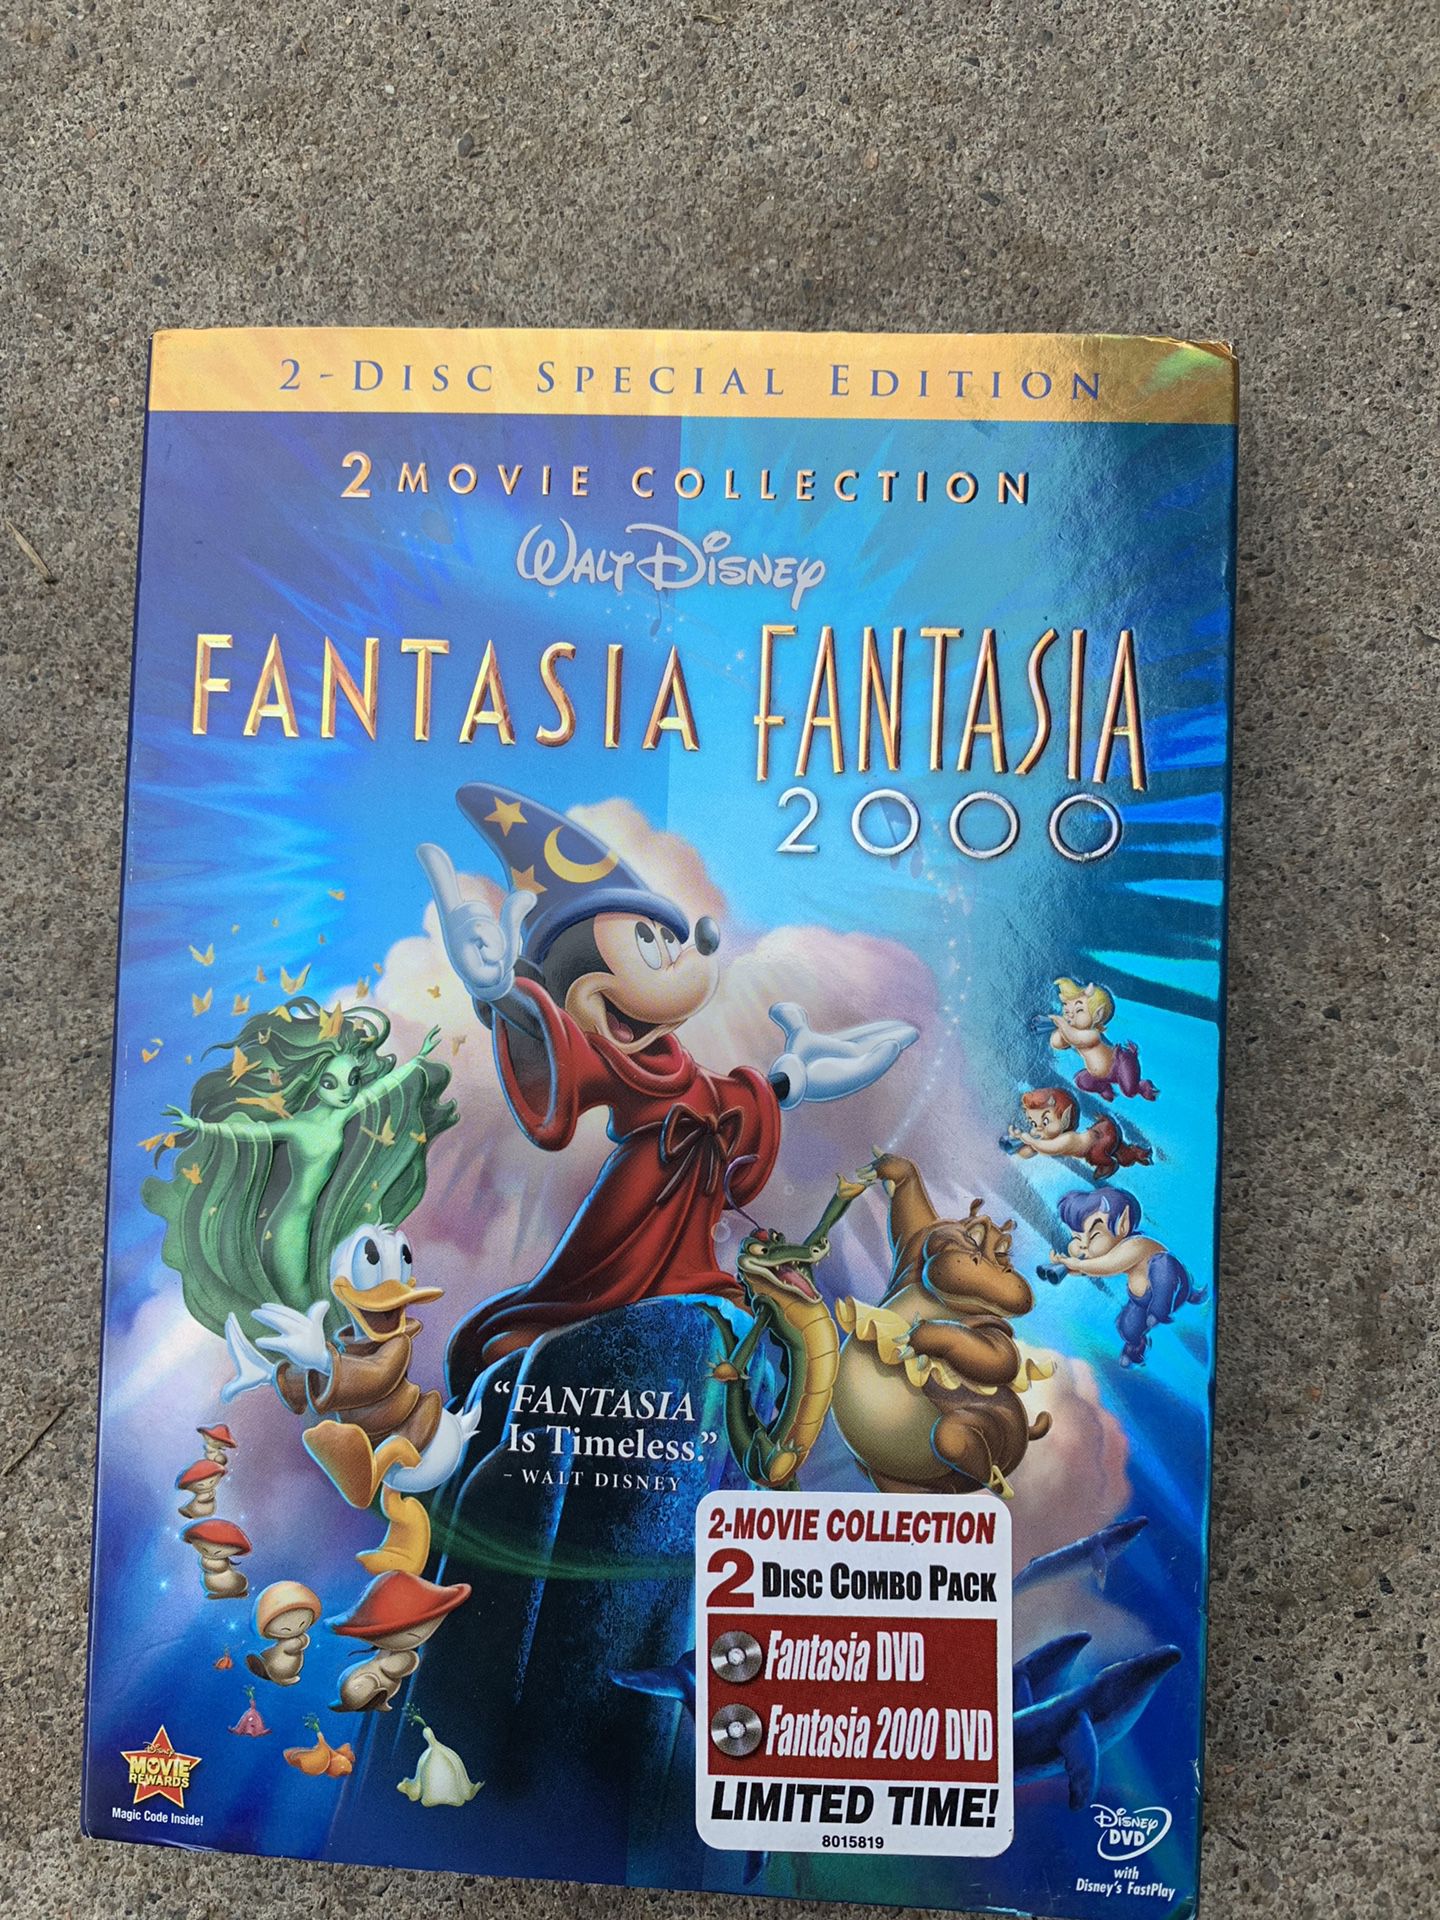 Fantasia　for　and　dvd　Anaheim,　Fantasia　OfferUp　in　2000　Sale　CA